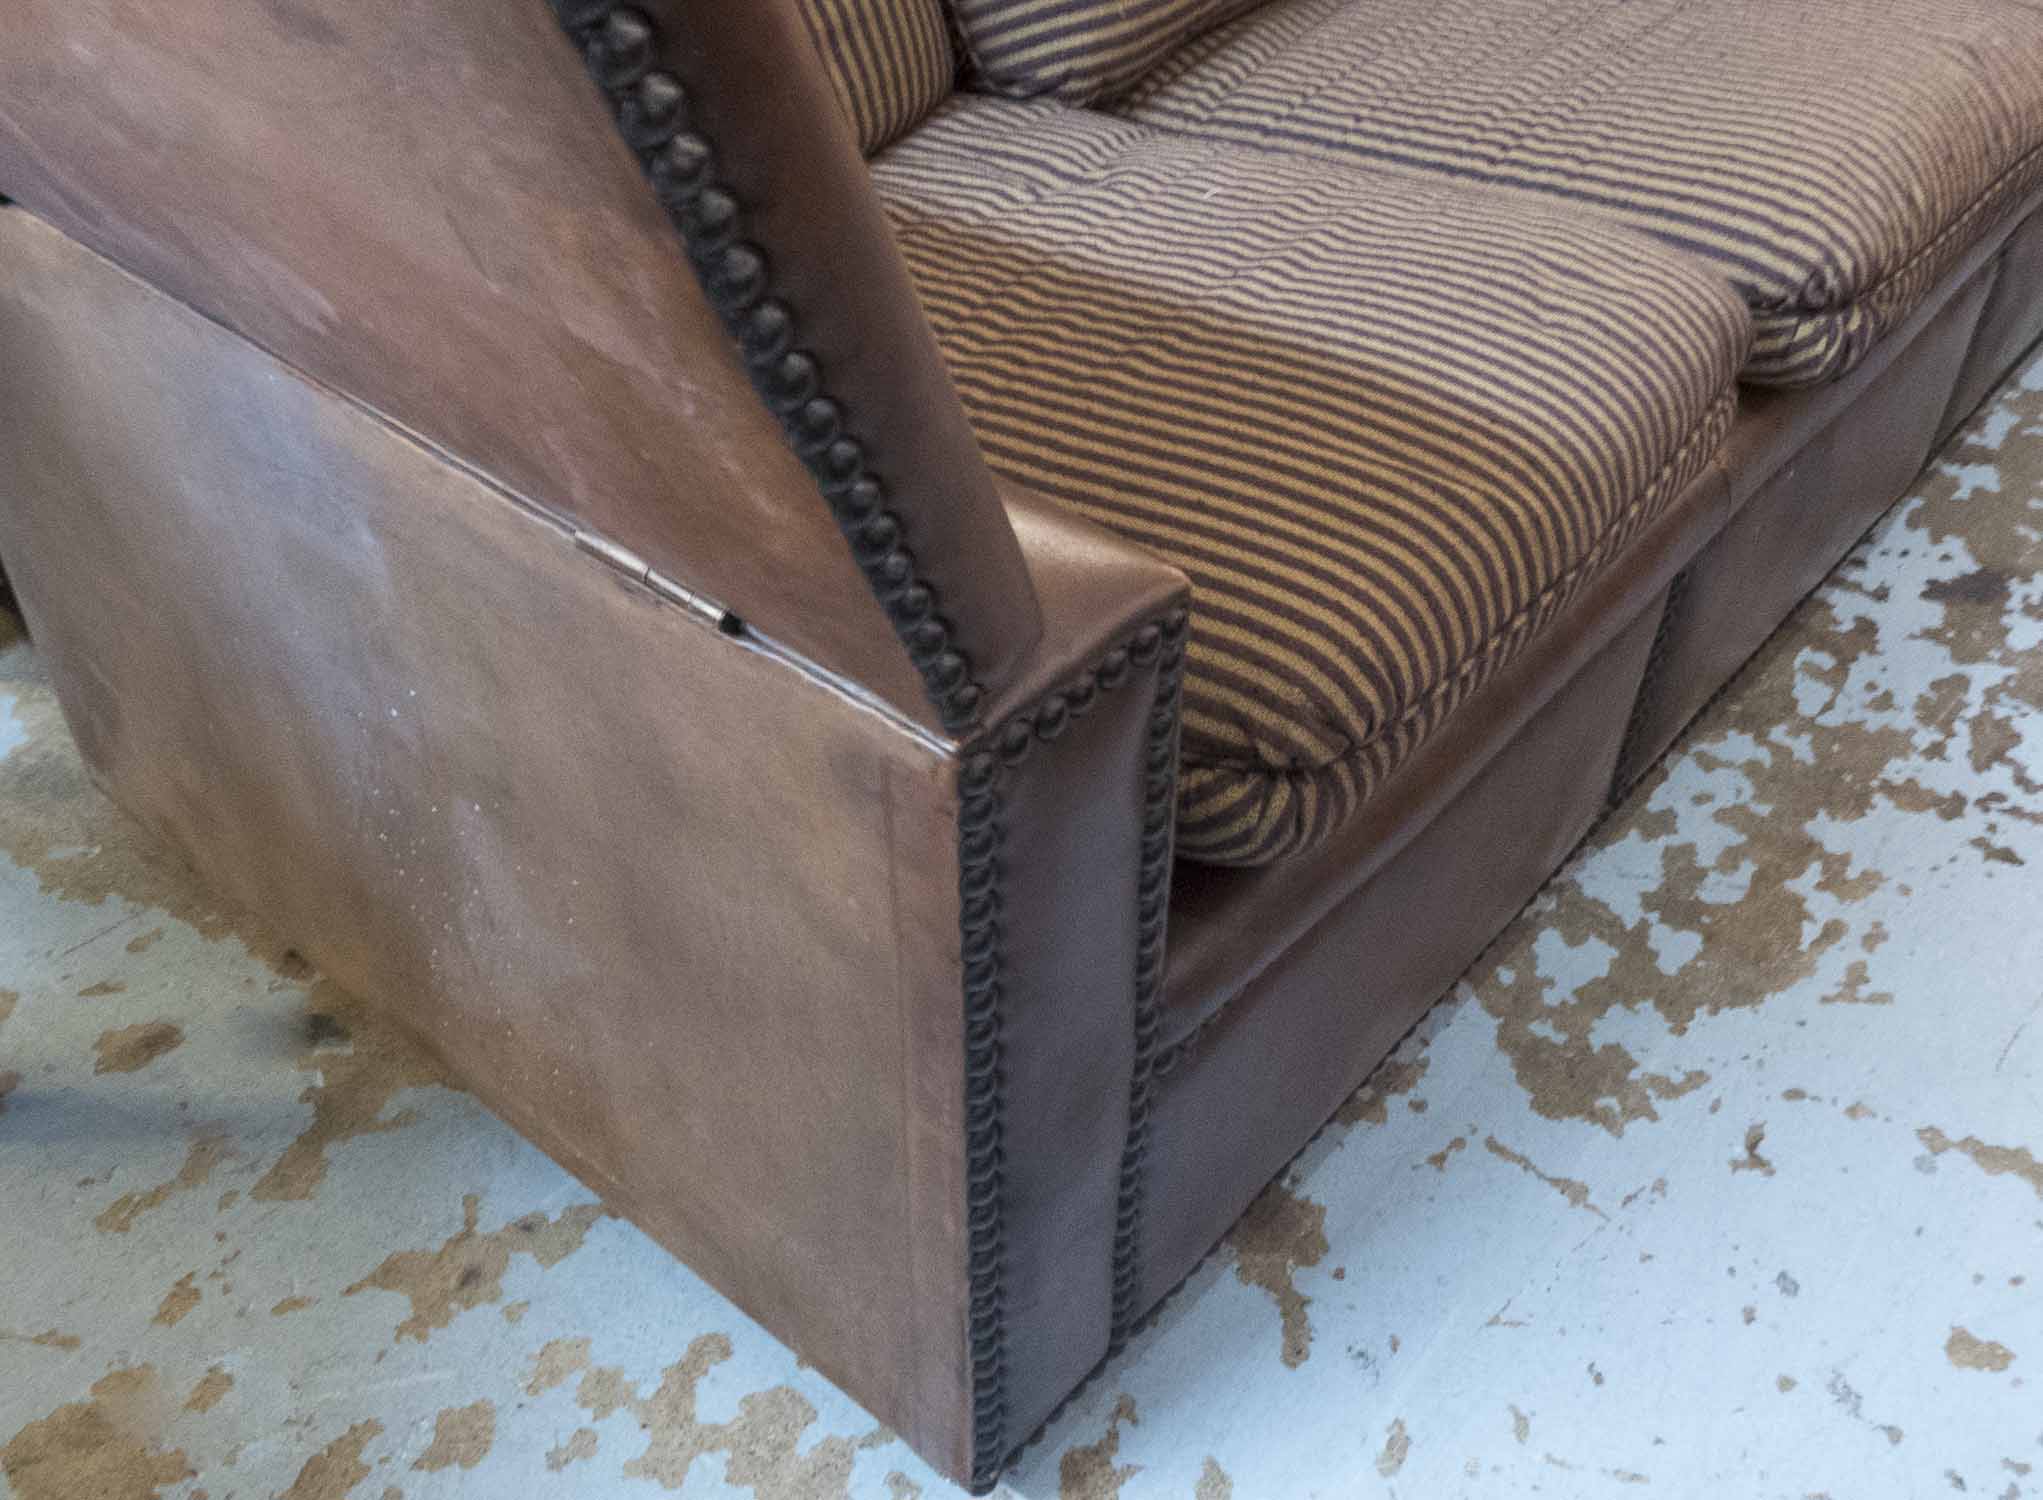 KNOLE SOFA, of substantial proportions, brown leather with studded detail and striped cushions, - Image 3 of 3